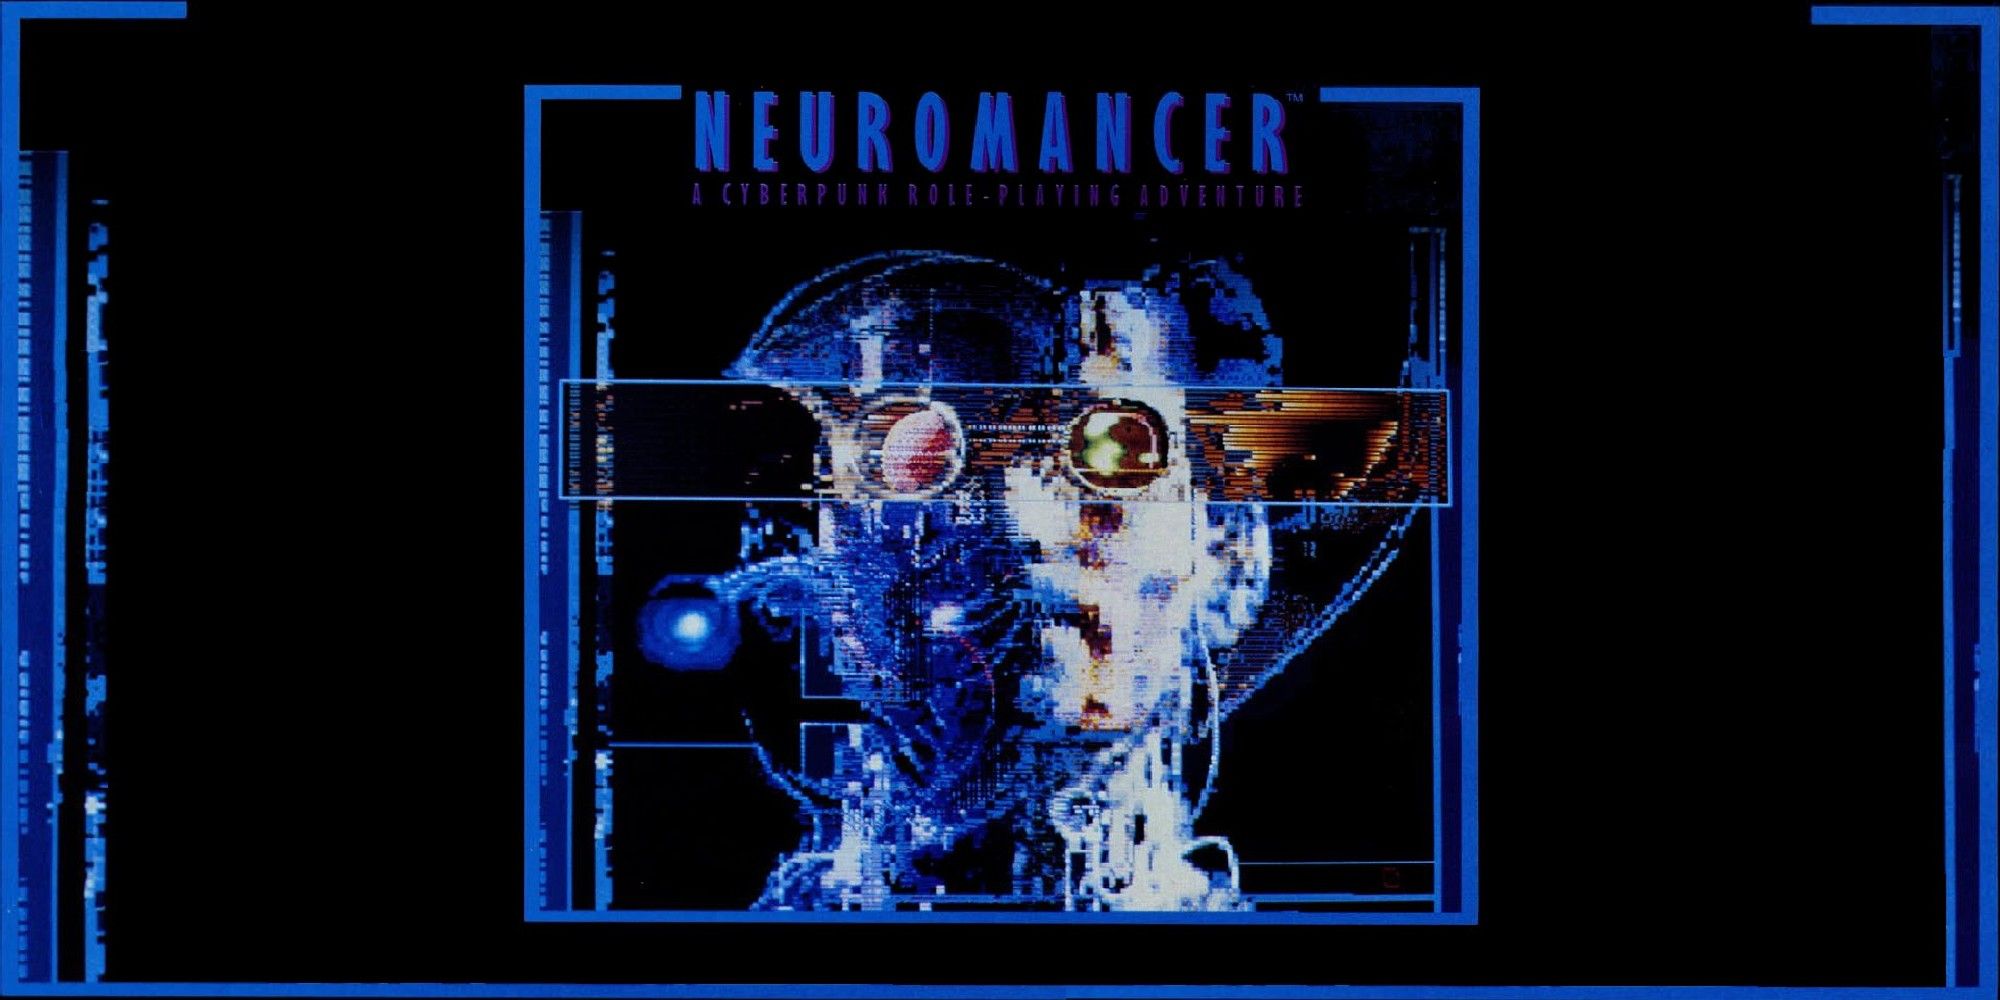 'Neuromancer' video game cover, featuring pixelated man with goggles on